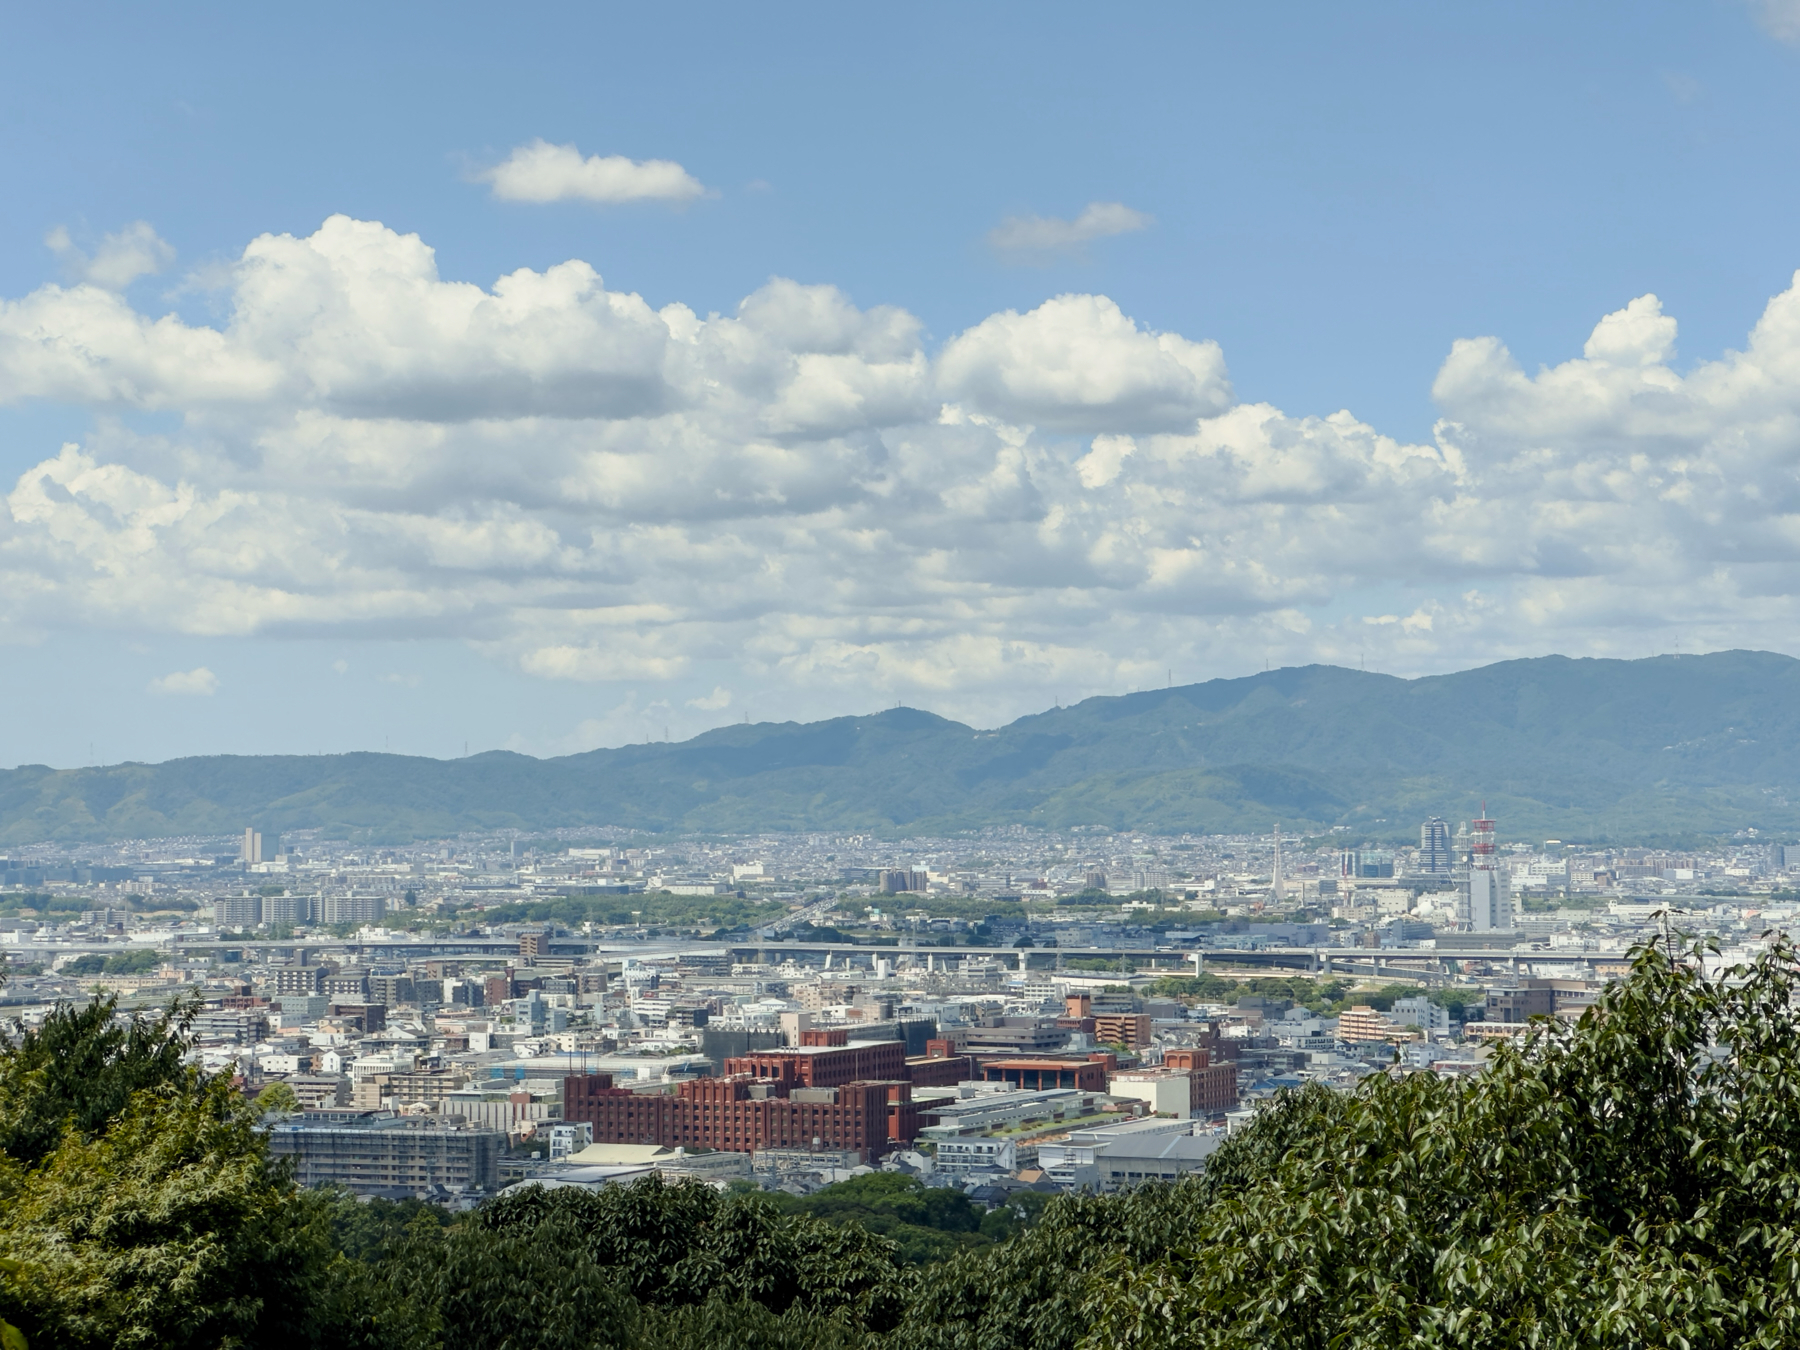 A view over Kyoto from halfway up the trail. The entire city and the lush green hills can be seen in the background.